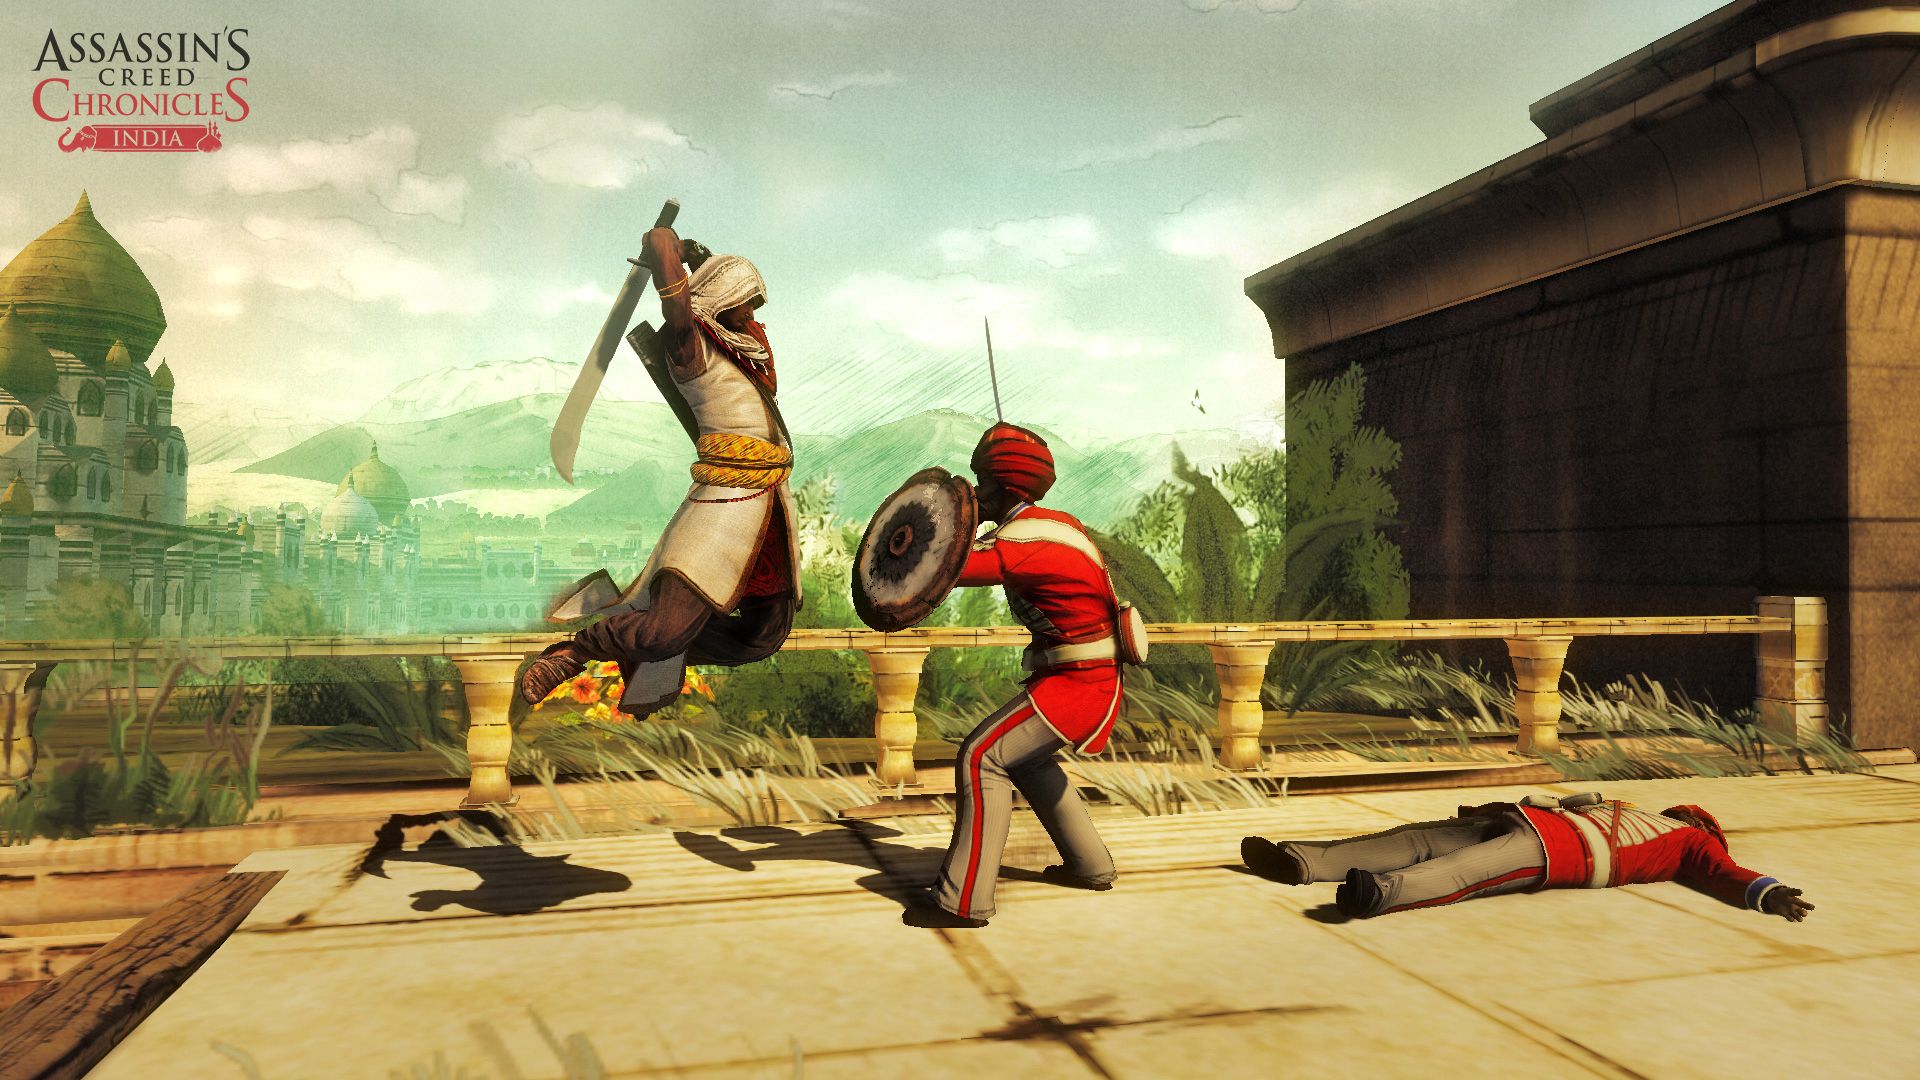 Assassin Creed Chronicles - India - 3